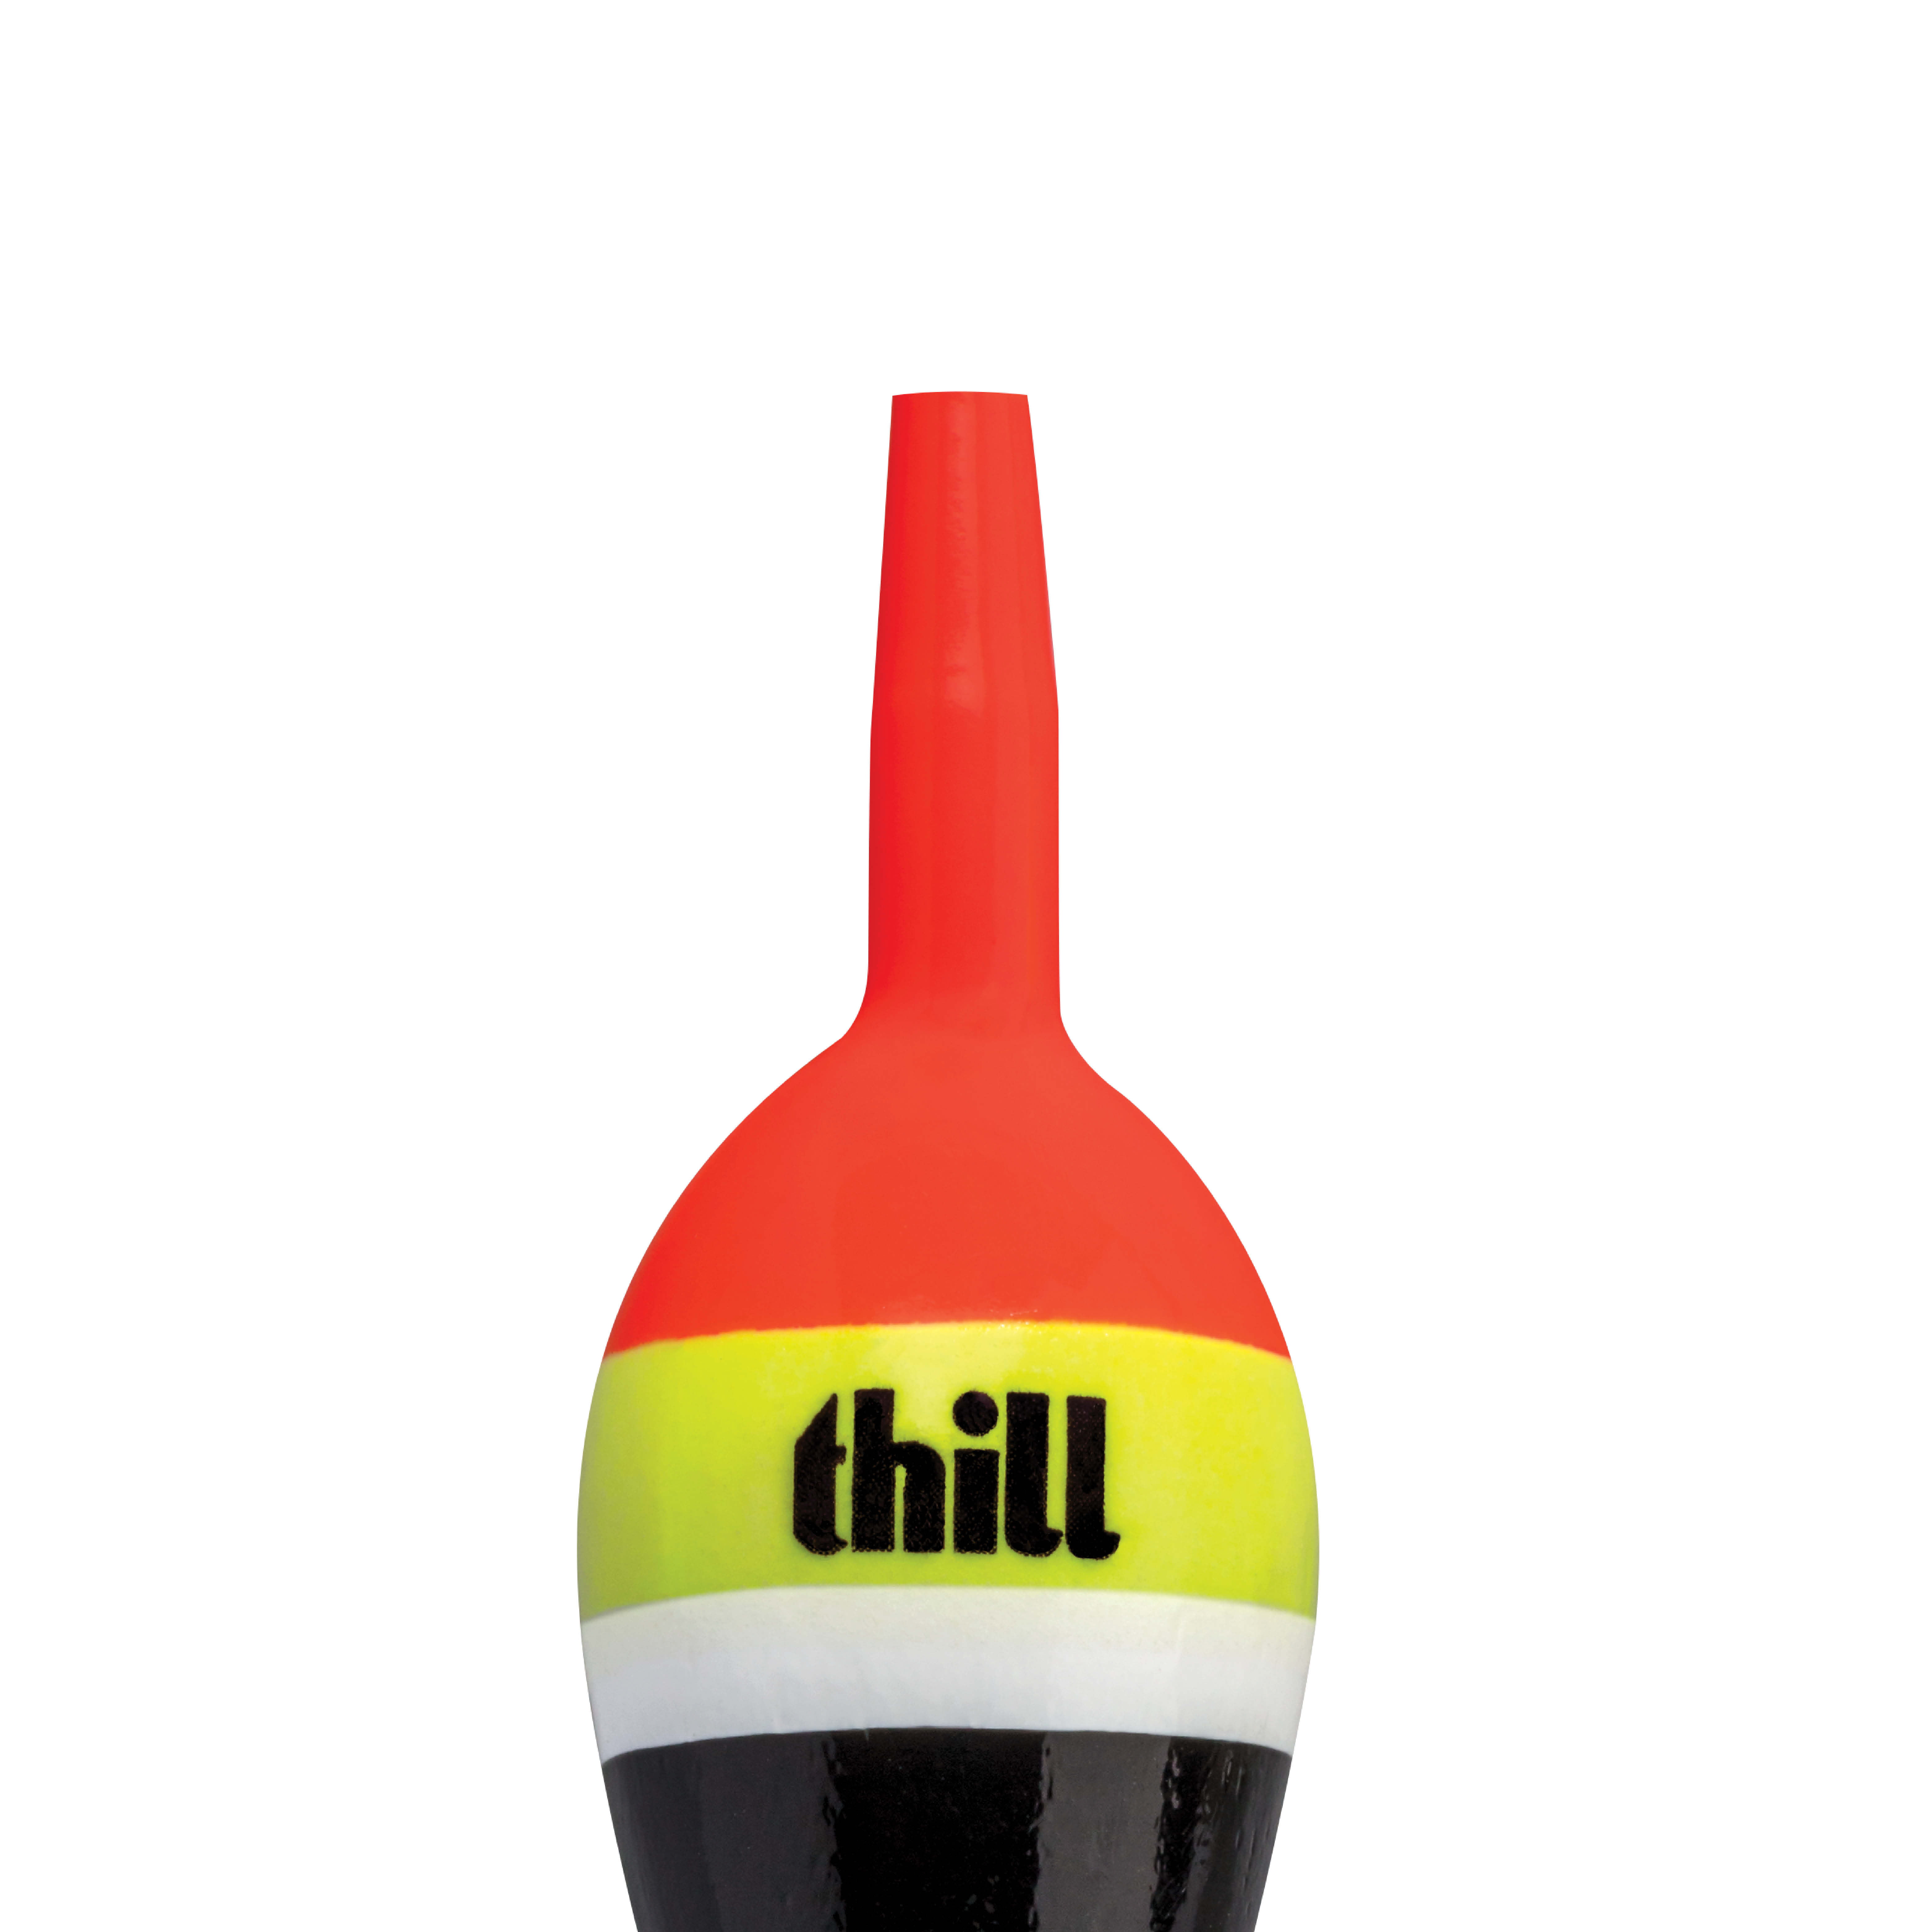 Thill Night N Day Glow Float Fishing Slip Float Yellow Black 3/4 in. Oval 